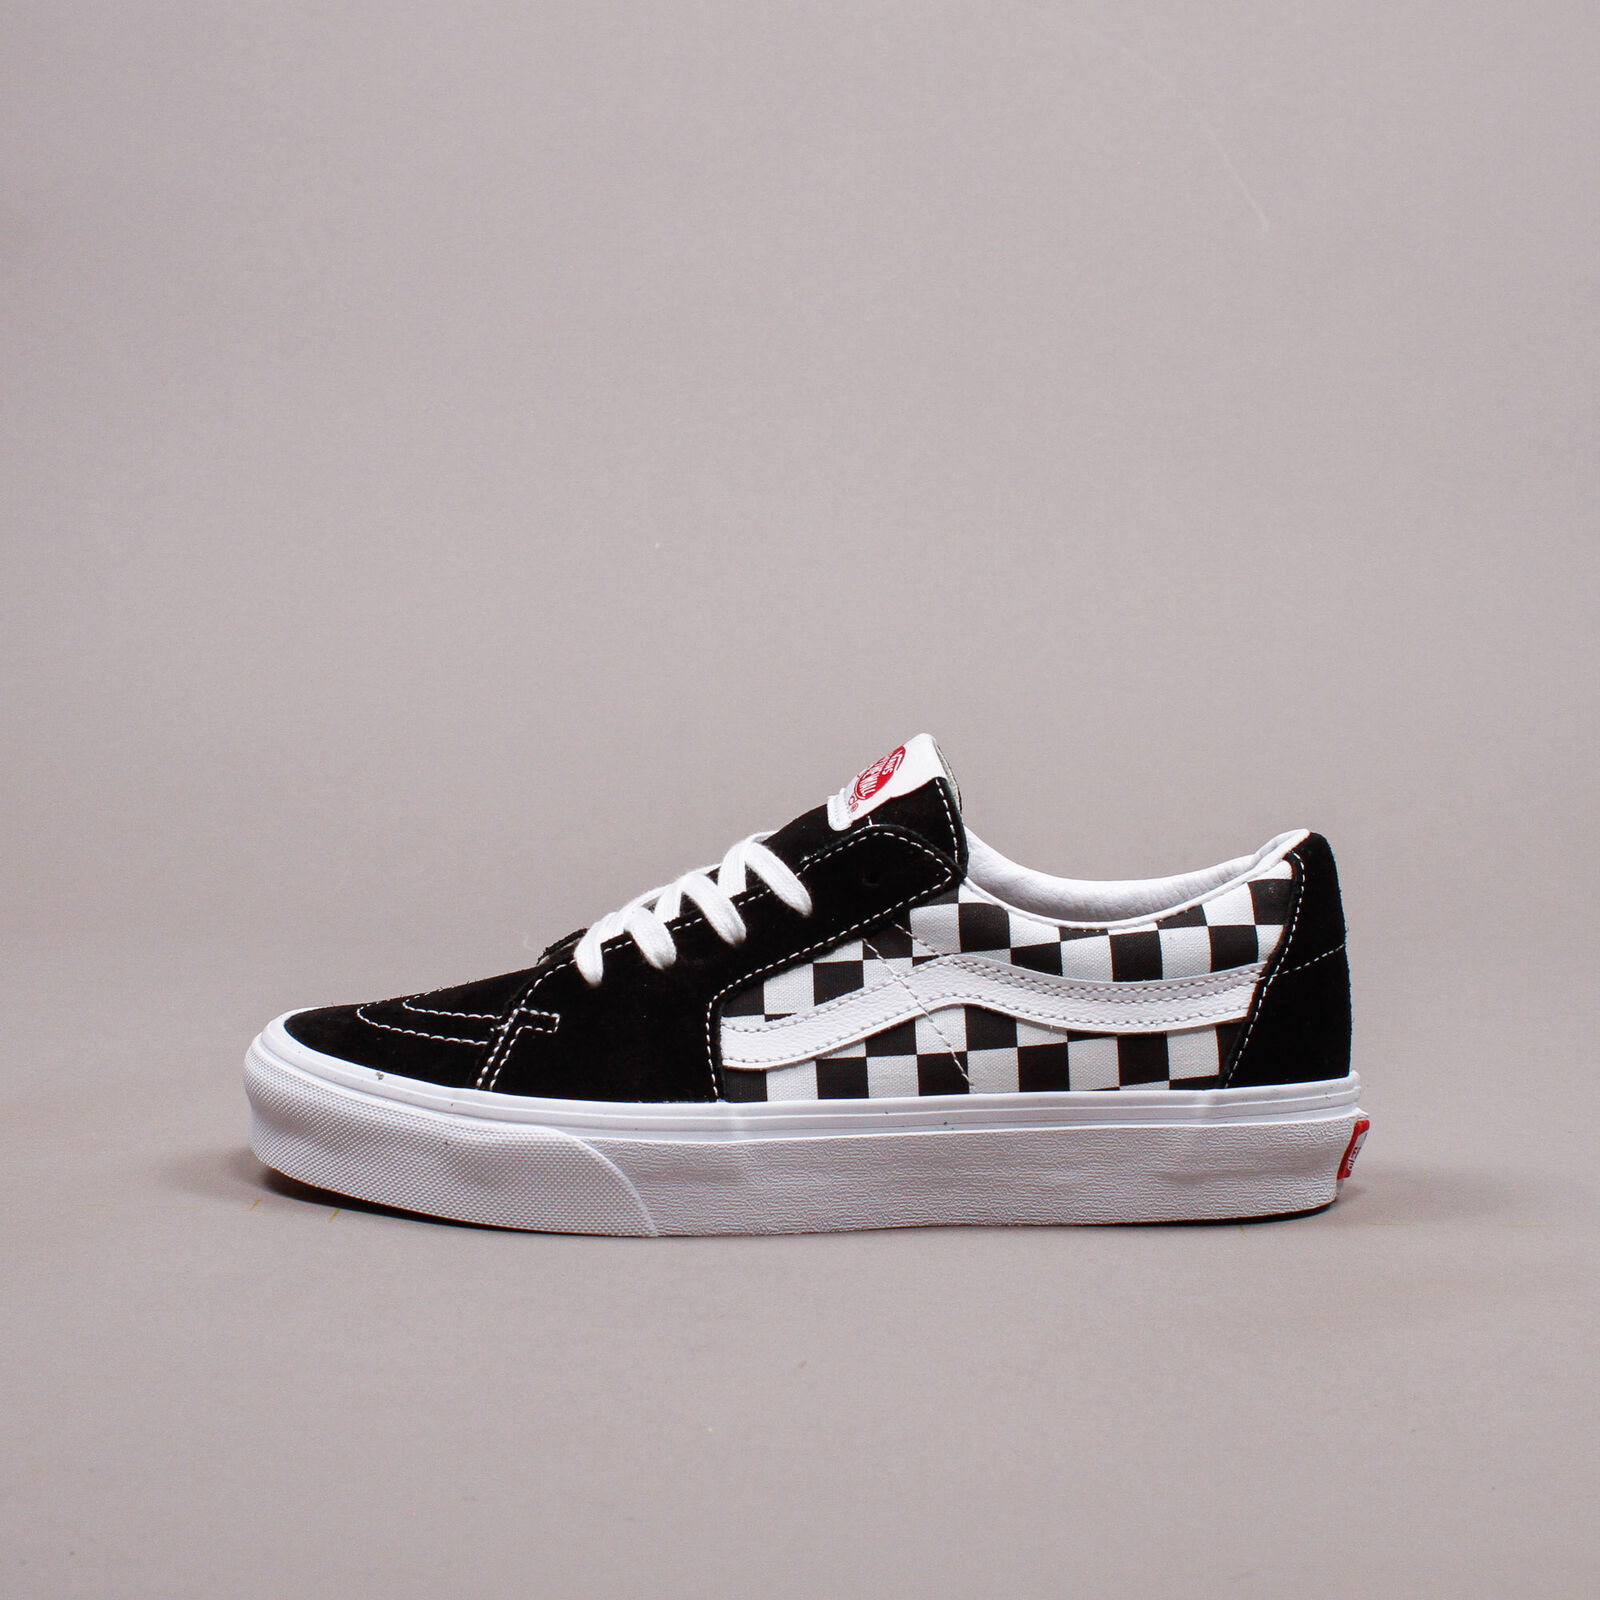 vans sk8 low black and white